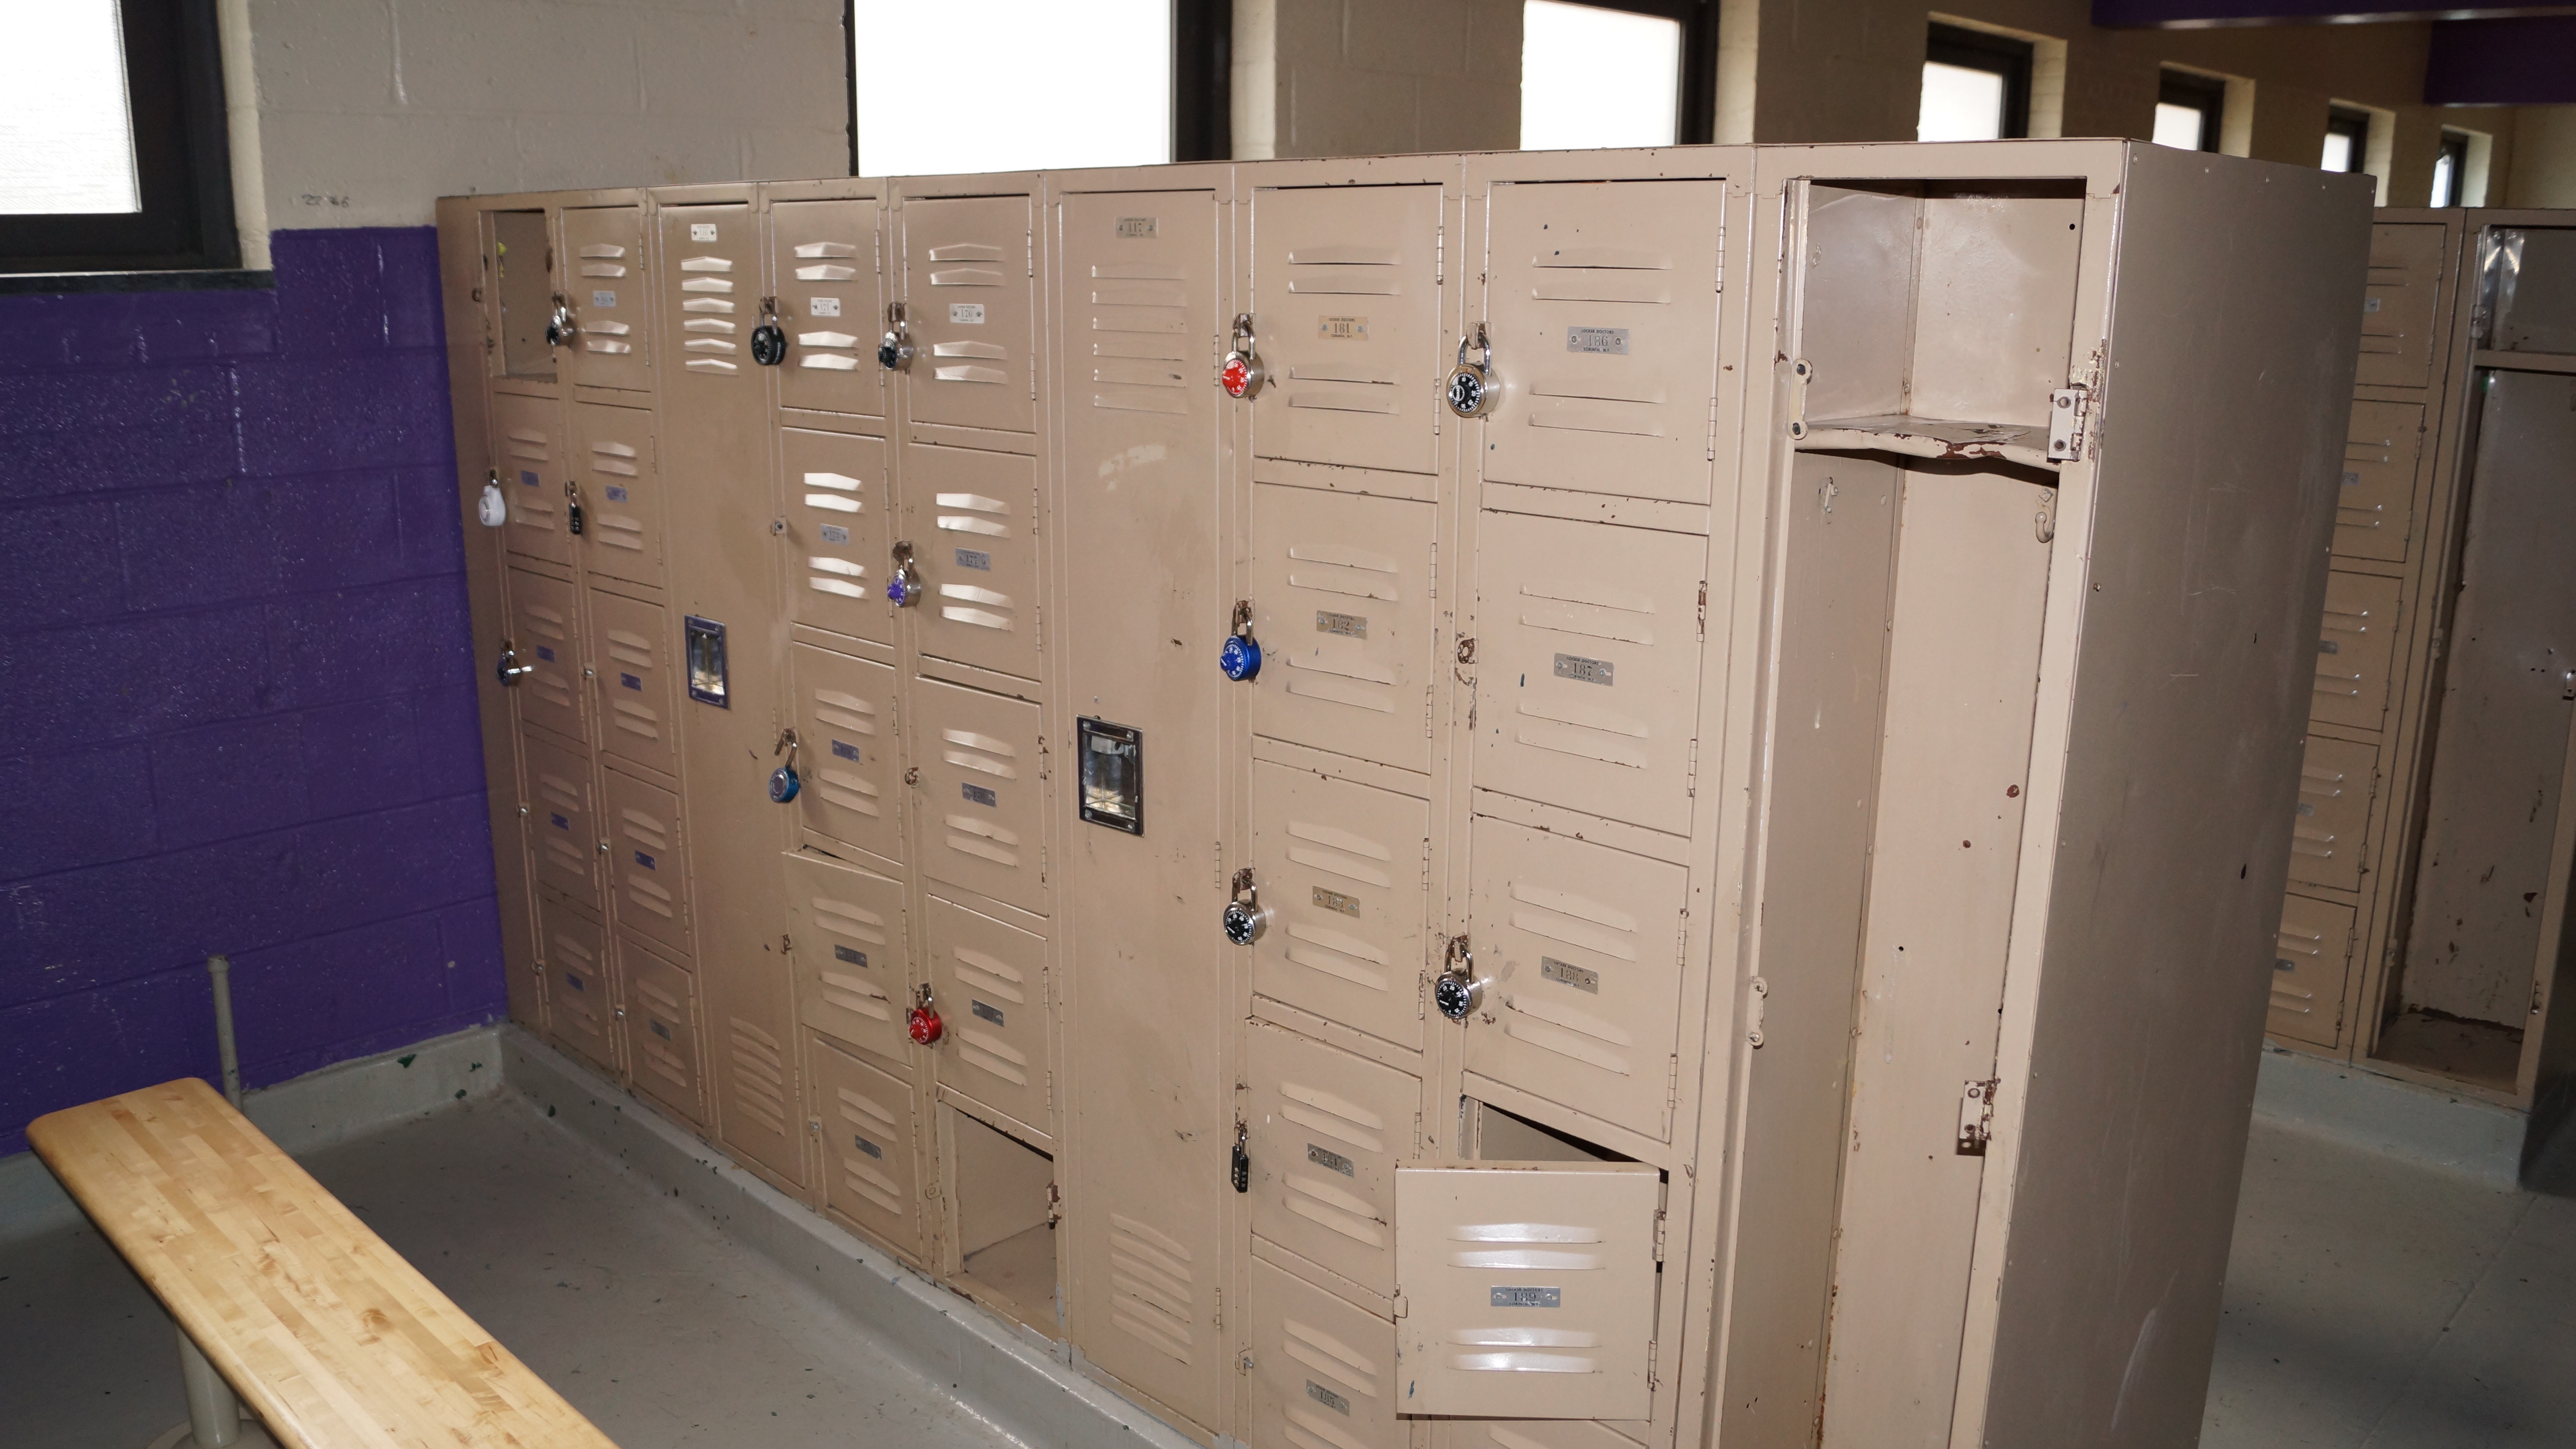 Looks like the lockers have not changed since 1964!